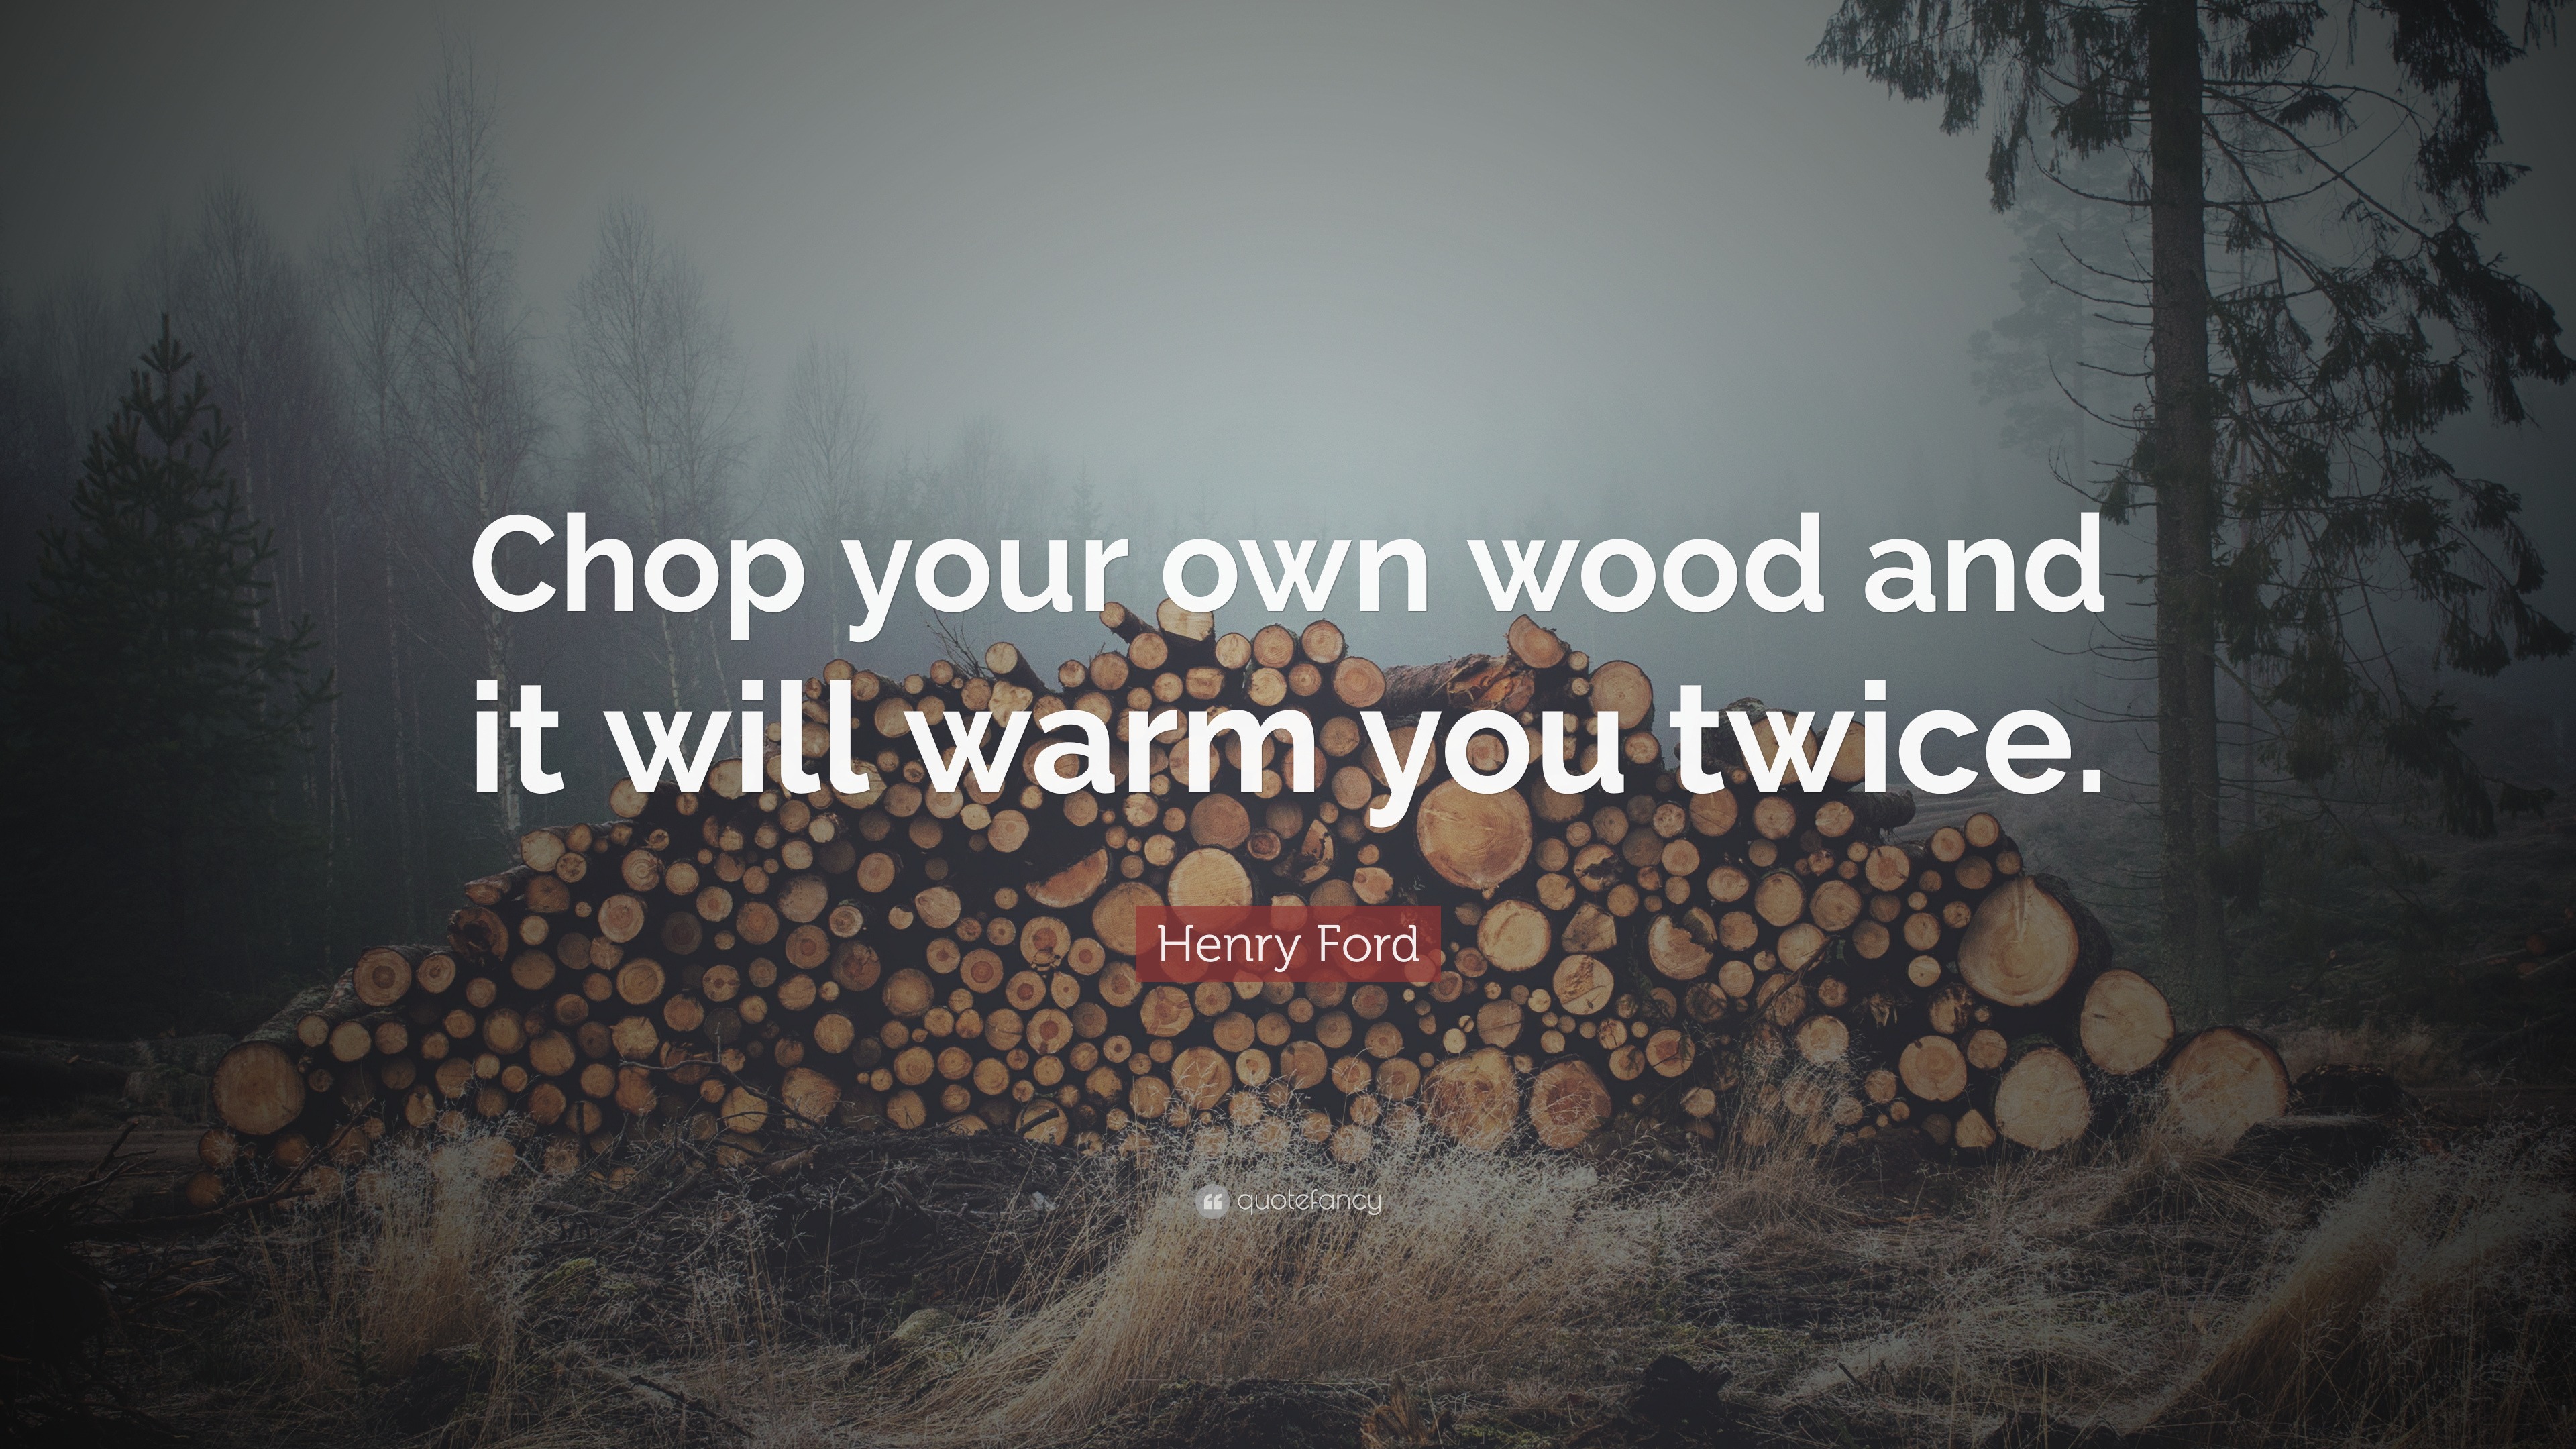 Henry Ford Quote: "Chop your own wood and it will warm you ...